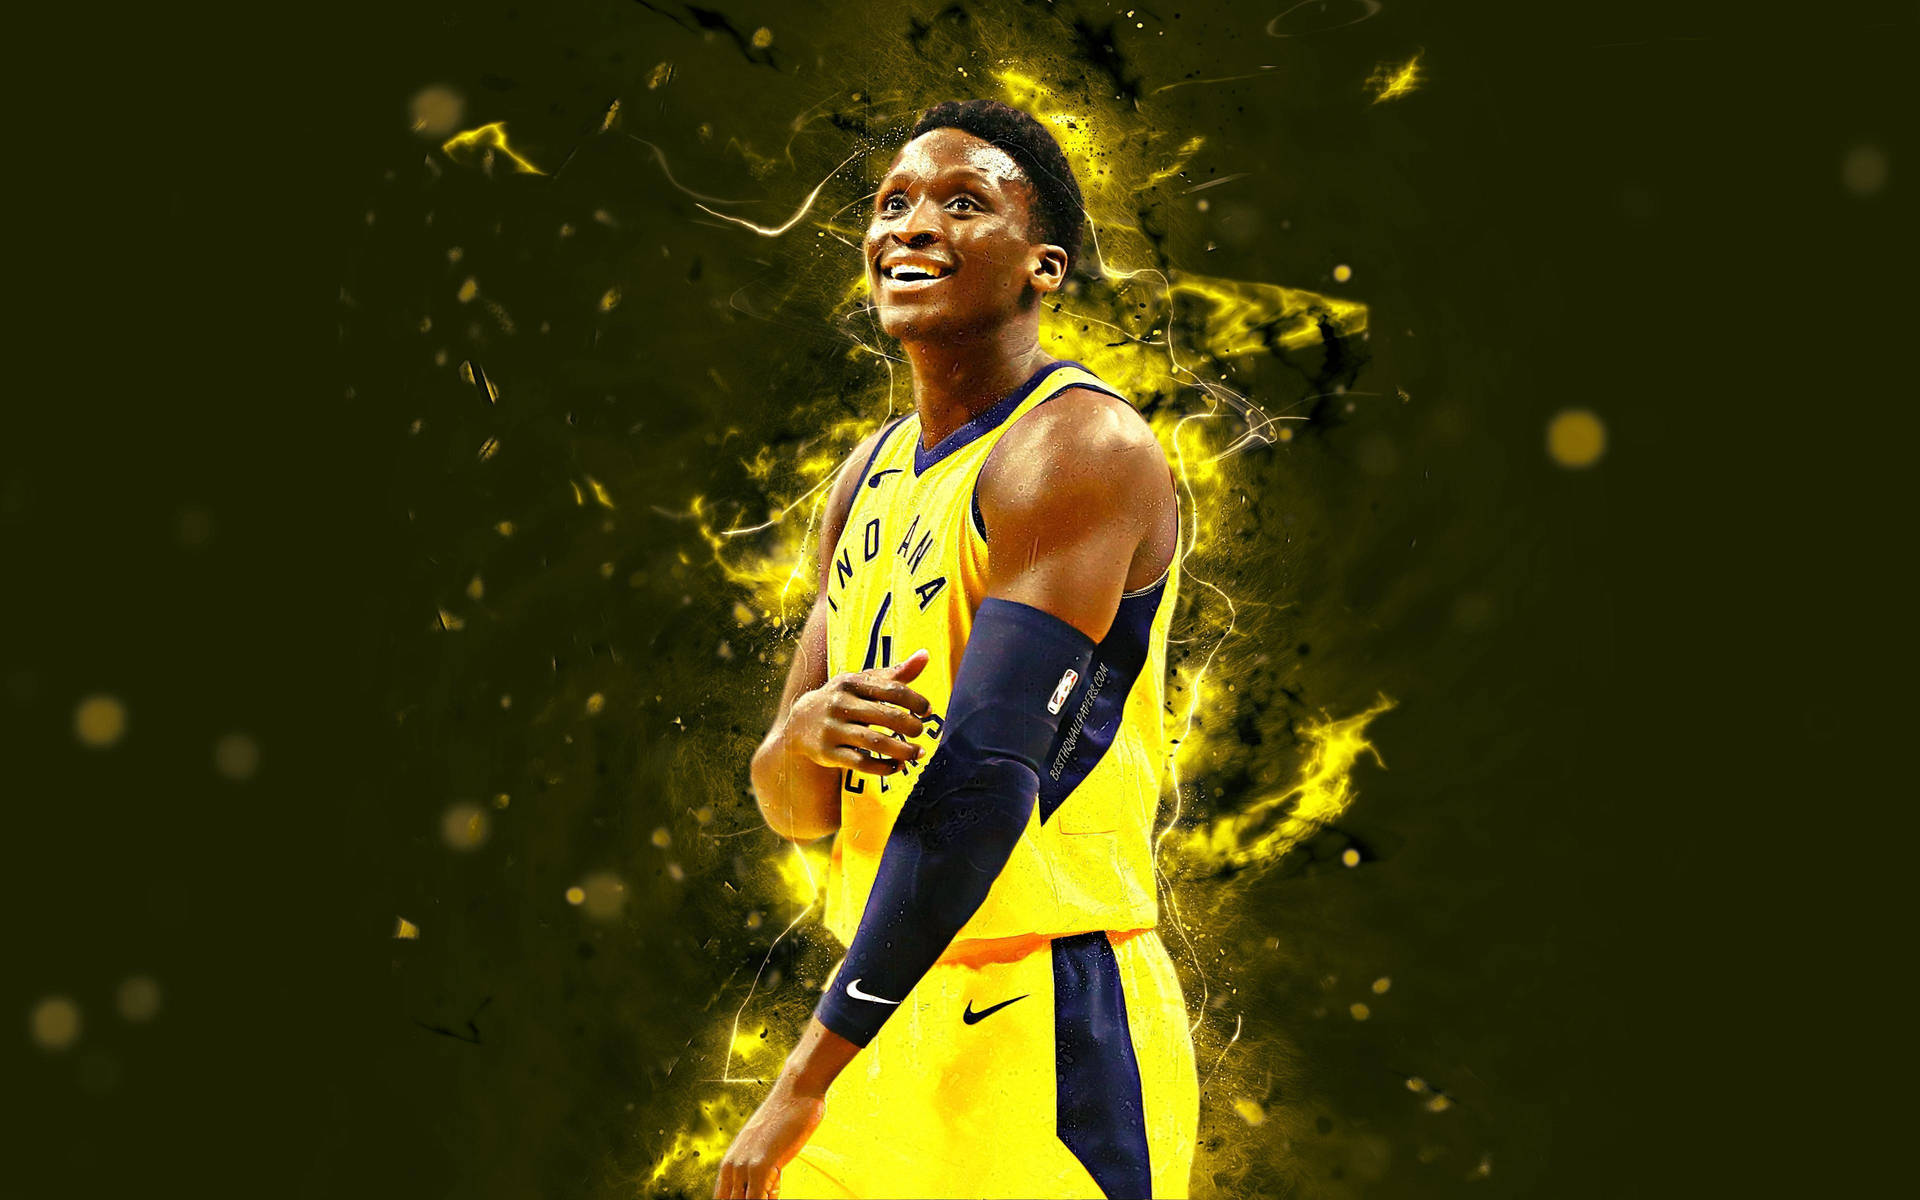 Blazing Digital Poster Of Victor Oladipo Background